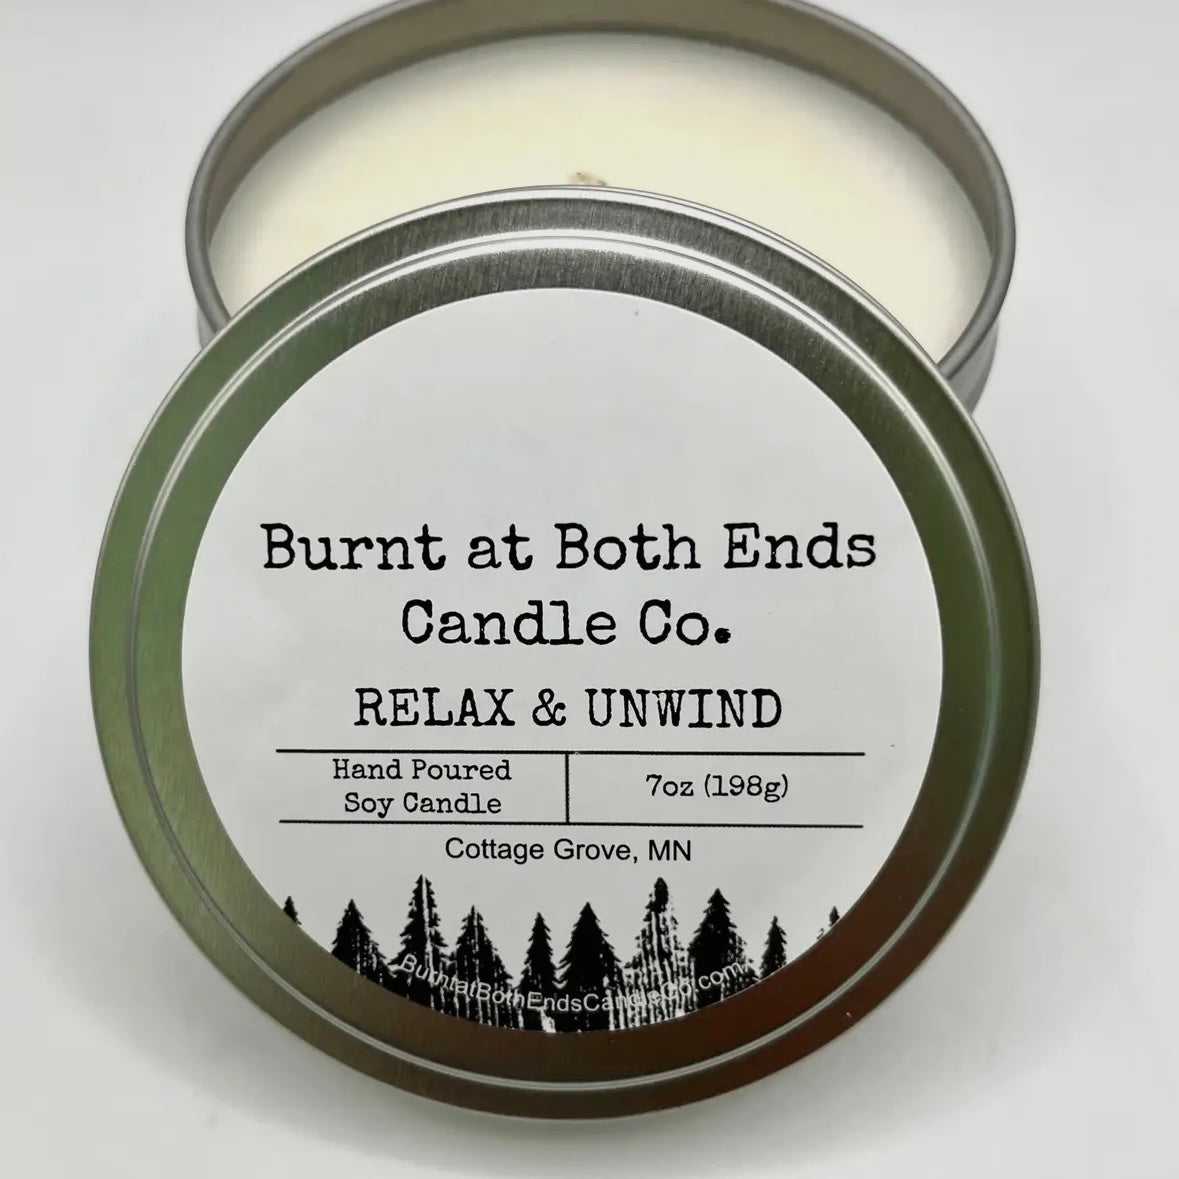 Burnt at Both Ends Candle - 7oz Tin - Relax & Unwind